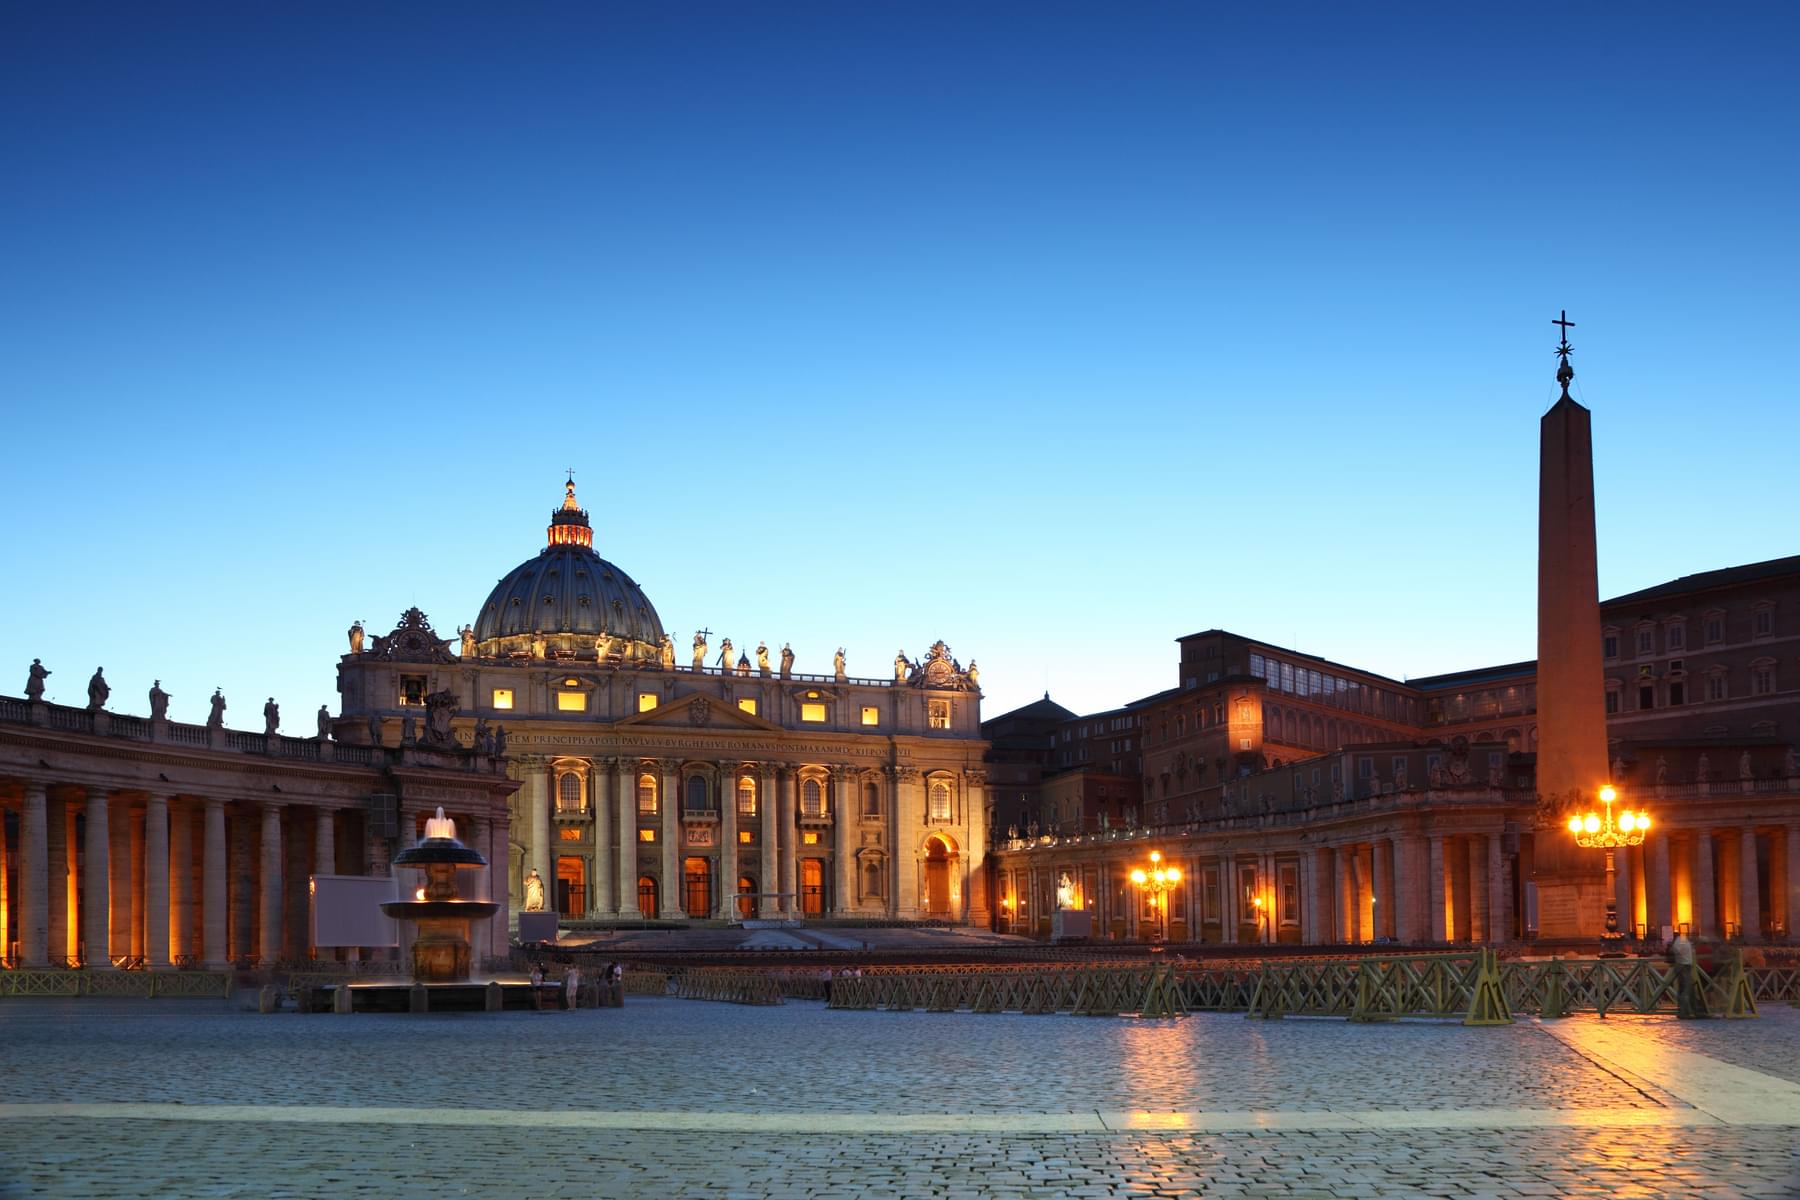 How to Reach The Vatican?